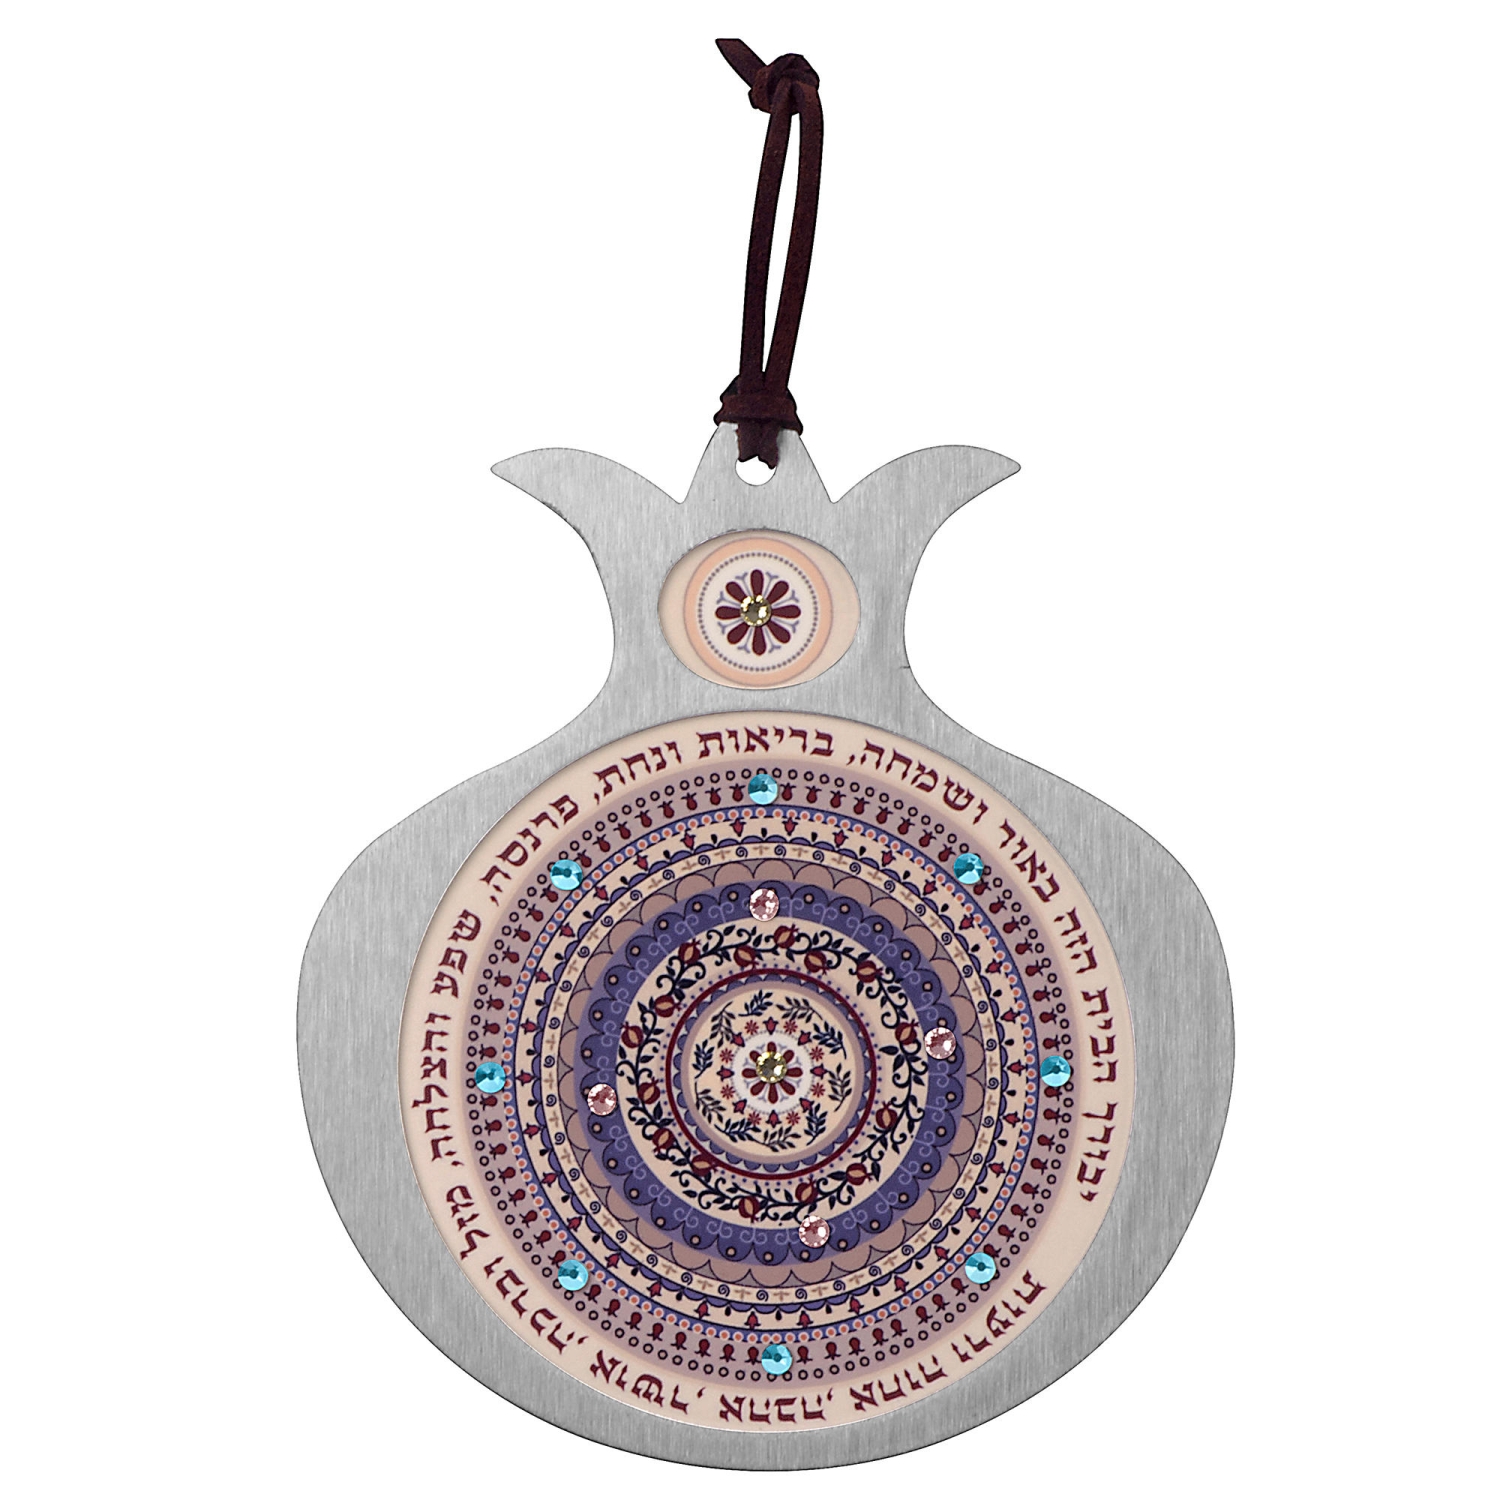 Dorit Judaica Stainless Steel Home Blessing Pomegranate Wall Hanging - Pinks and Purple - 1